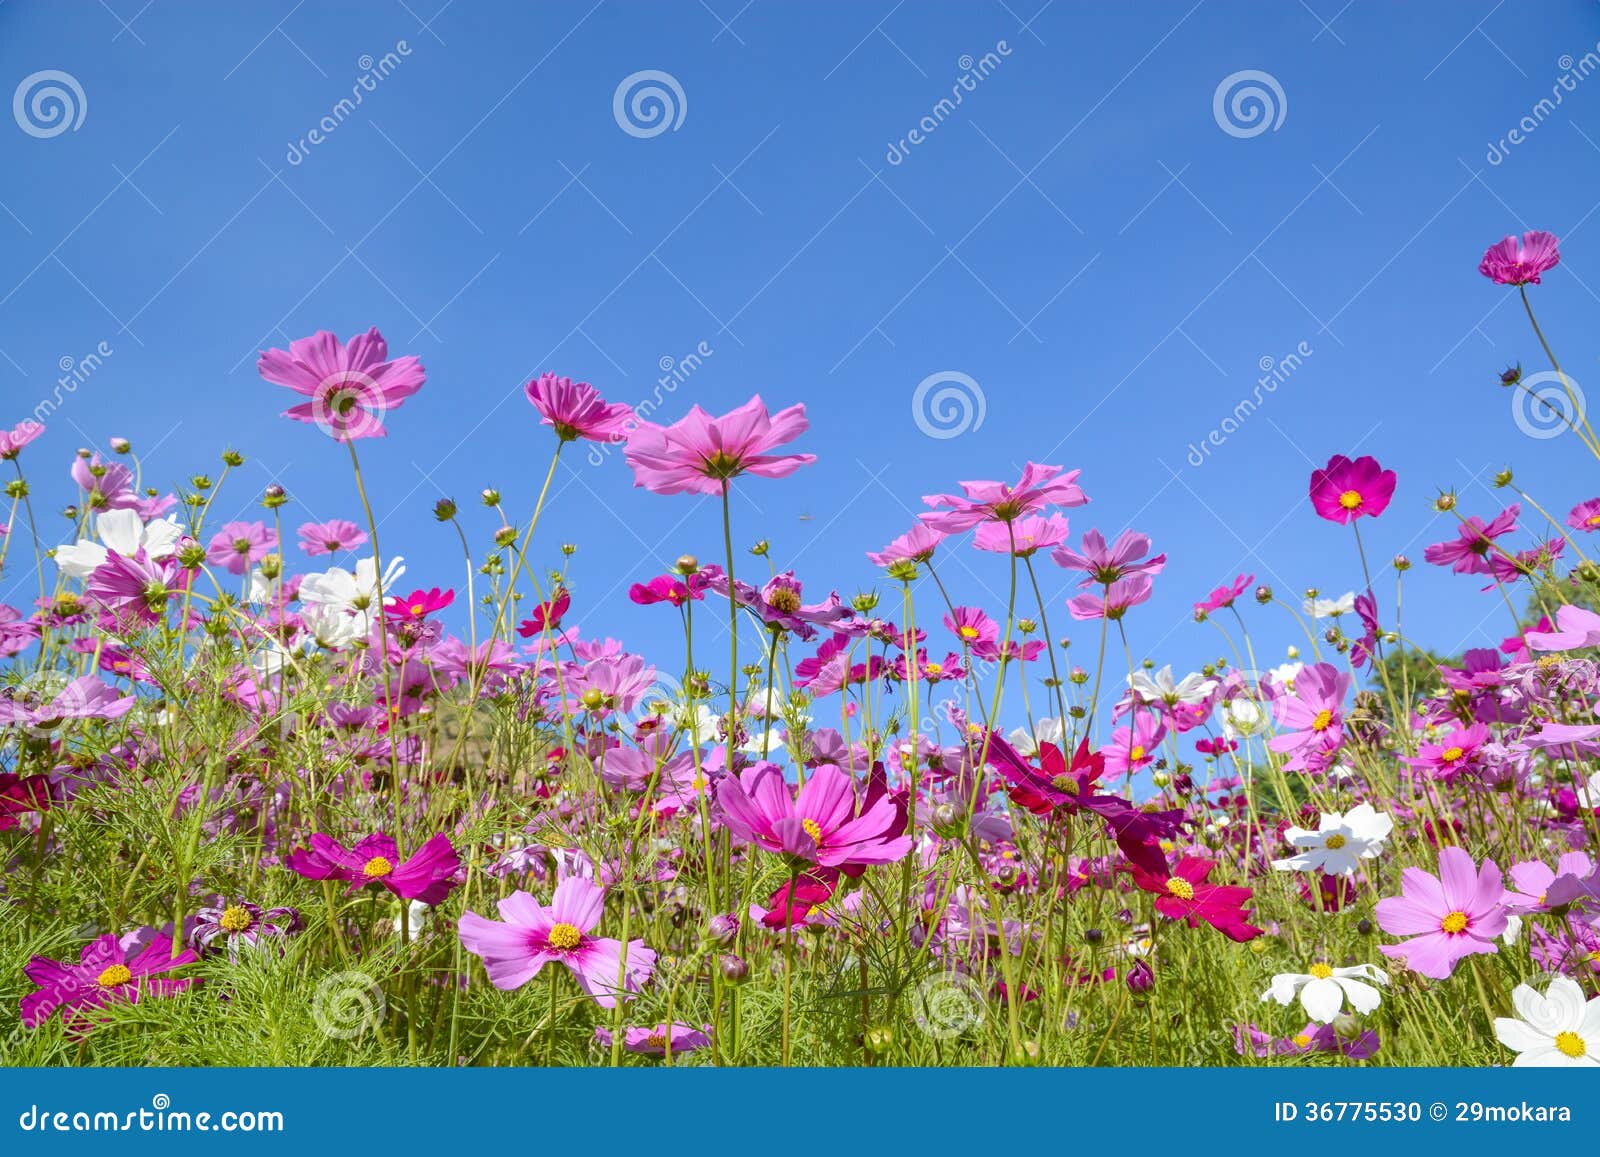 cosmos flowers with the blue sky